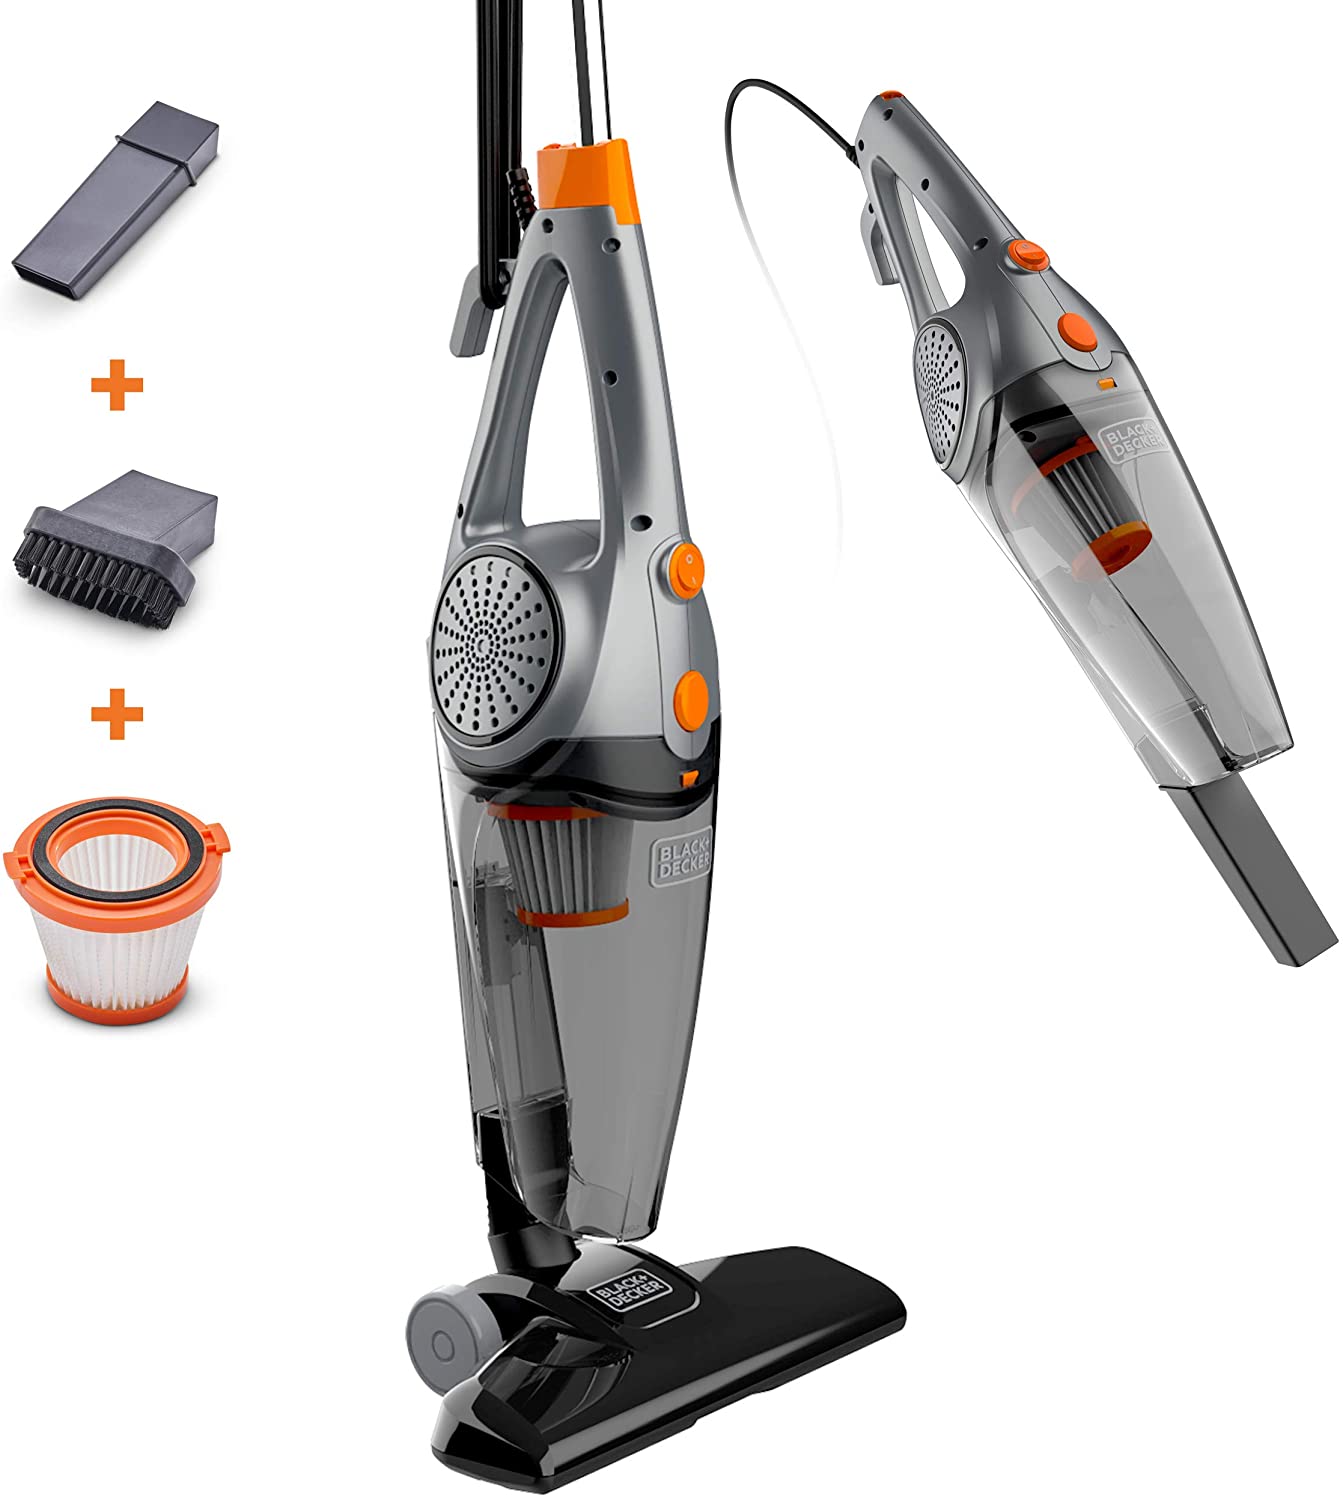 BLACK+DECKER 3-in-1 Corded Upright Vacuum Cleaner Model #BDXHHV005